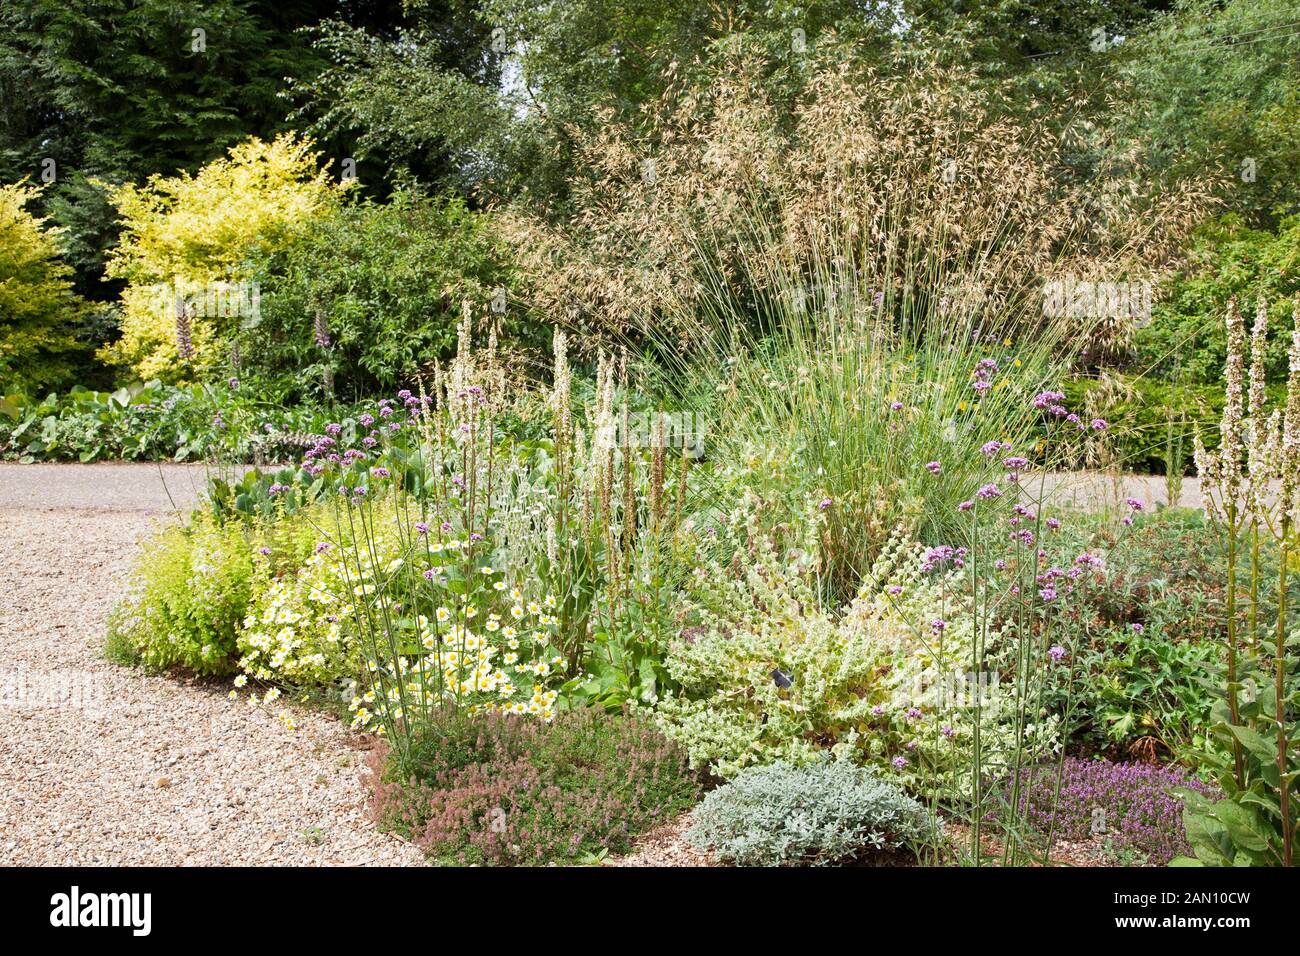 DROUGHT TOLERANT PLANTS AT BETH CHATTO'S GARDEN Stock Photo